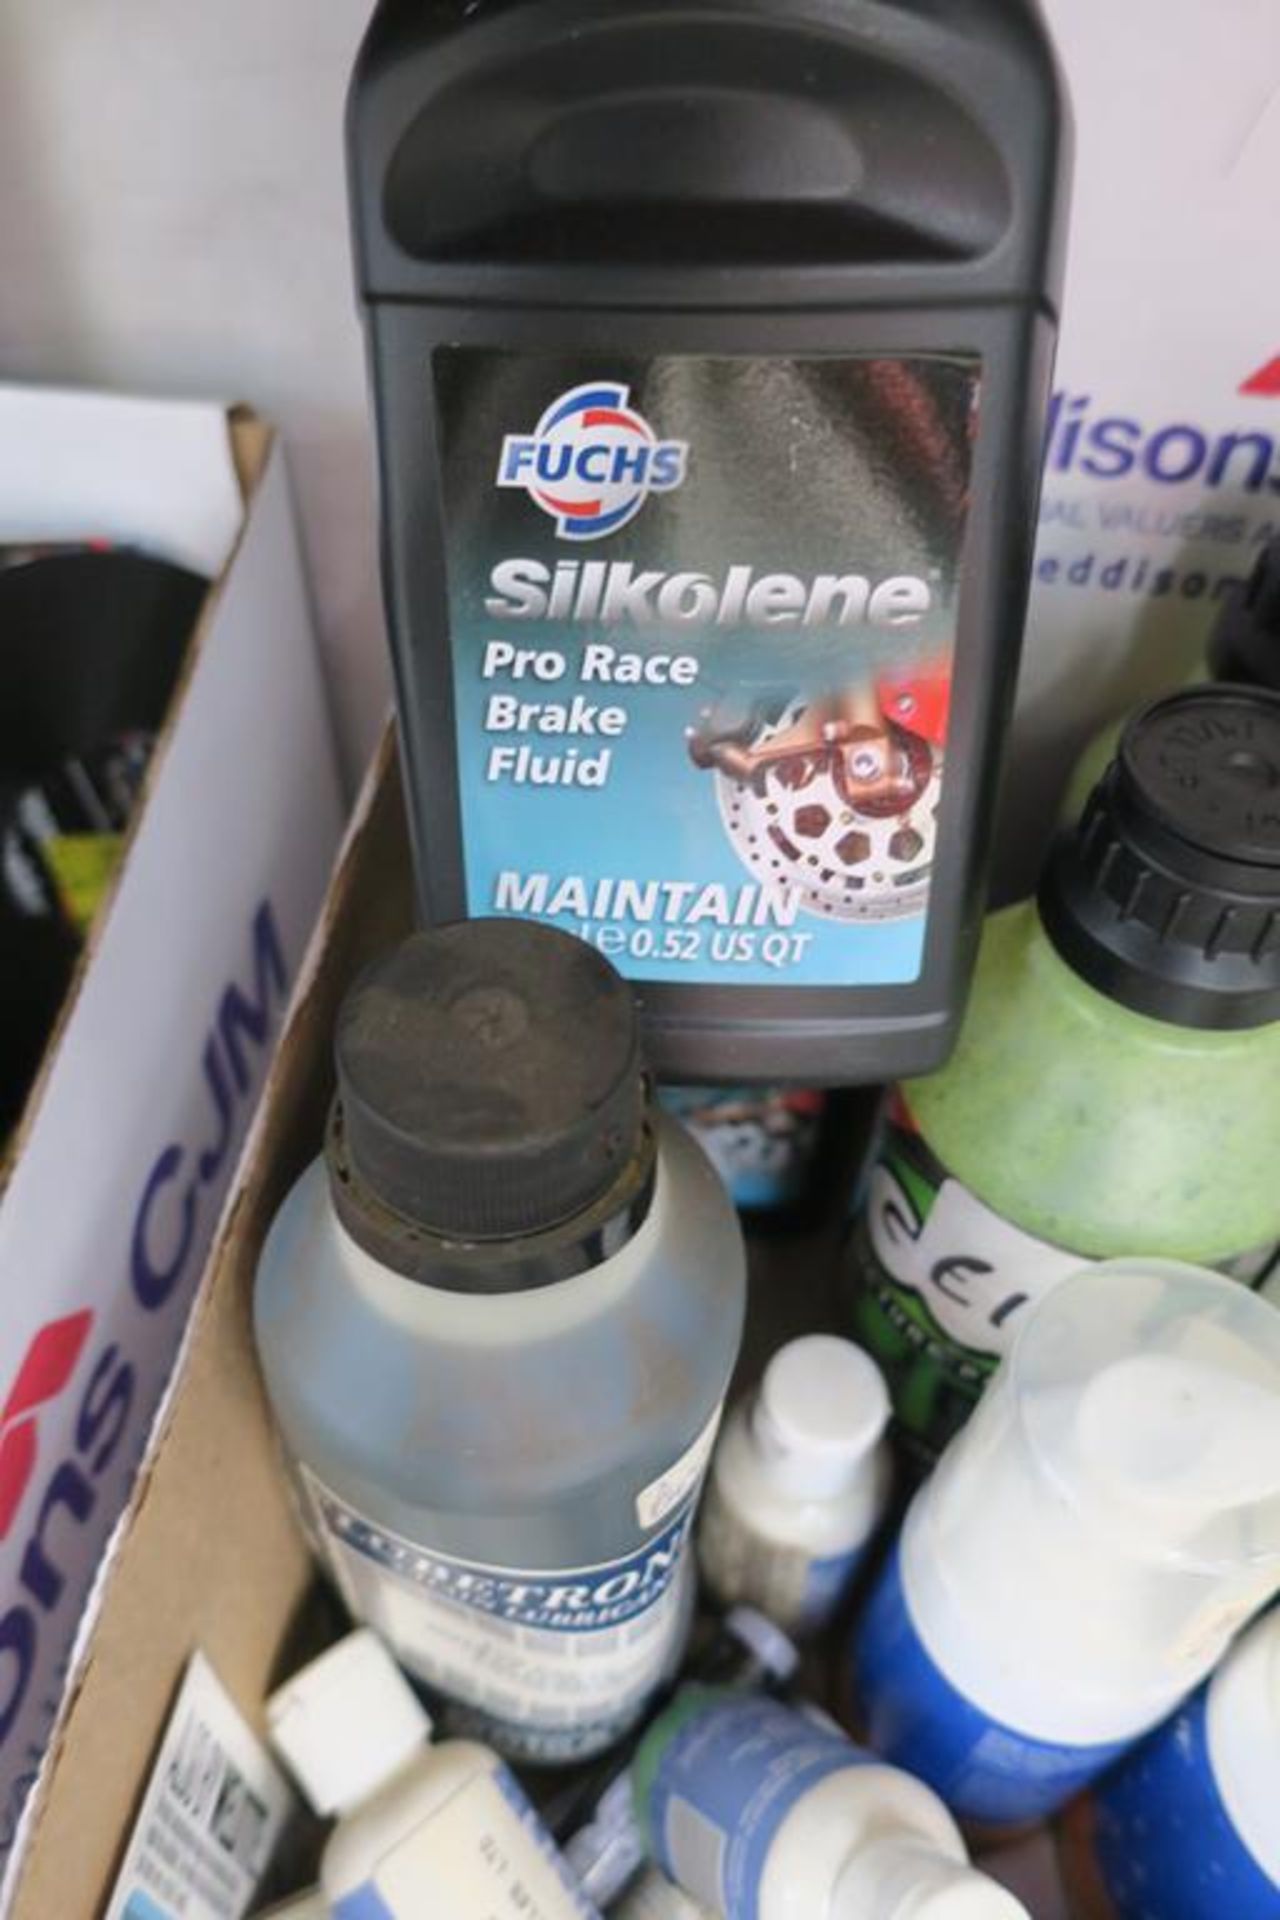 Shelf of Assorted Motorcycle Lubricants, Paint, Grips, Puncture Repair Kits - Image 7 of 9